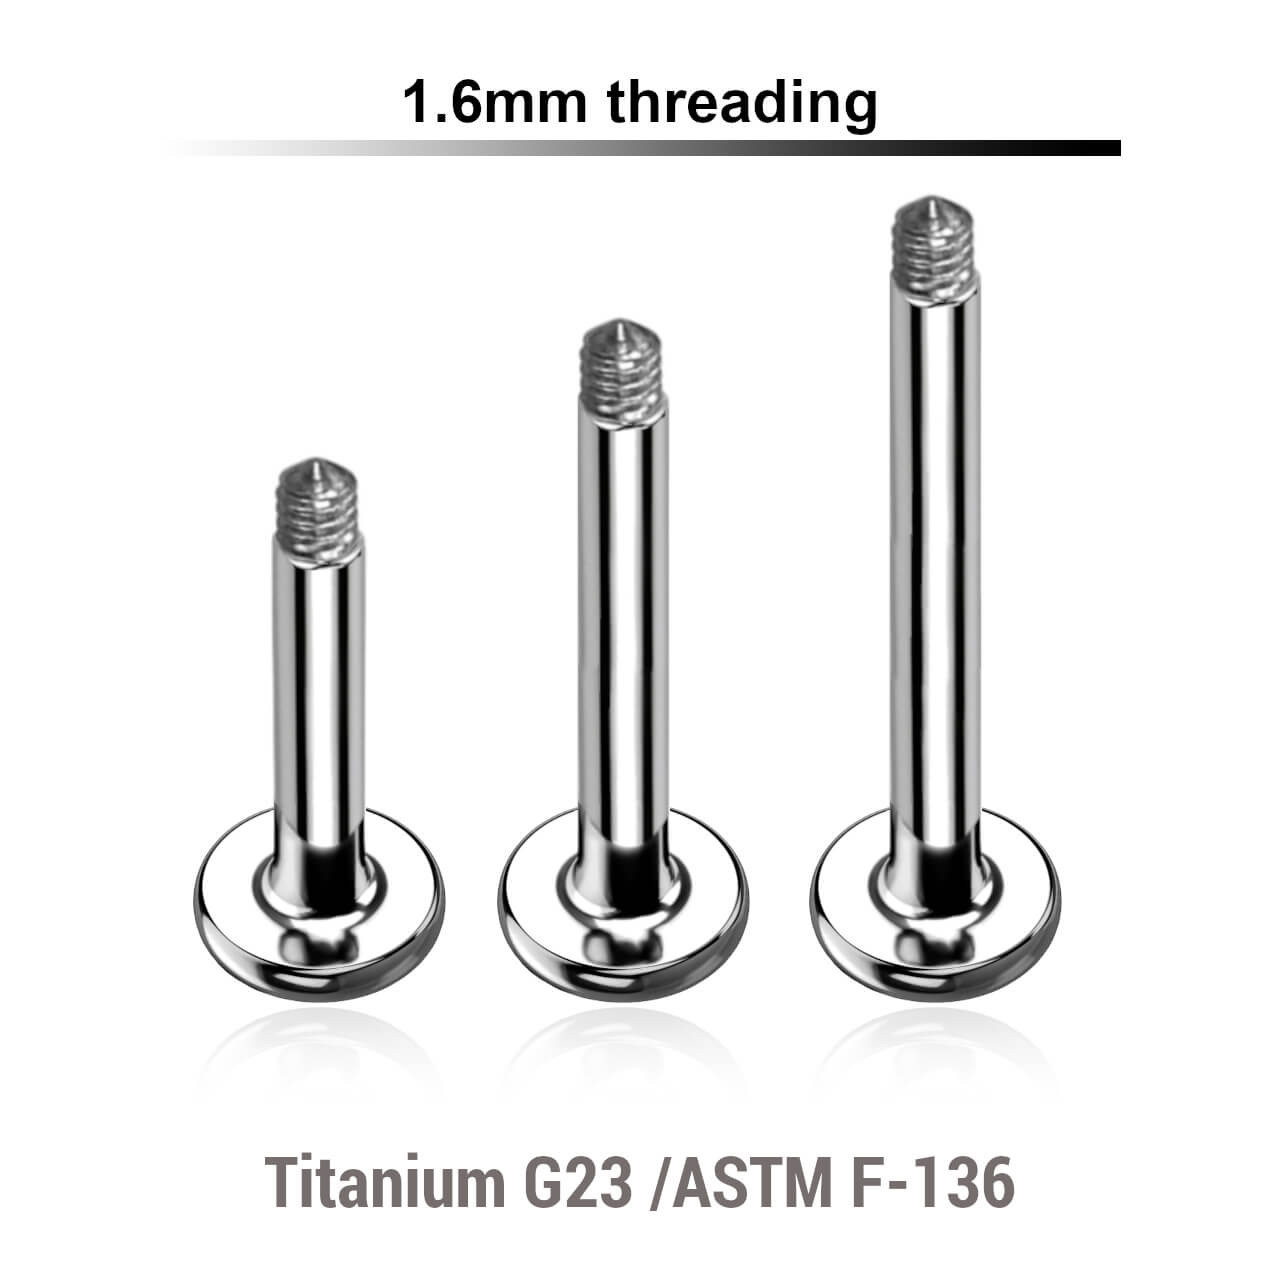 TYLB16N Piercing studio supplies: Pack of 25 pcs. of labret posts in high polished titanium G23, thickness 1.6mm